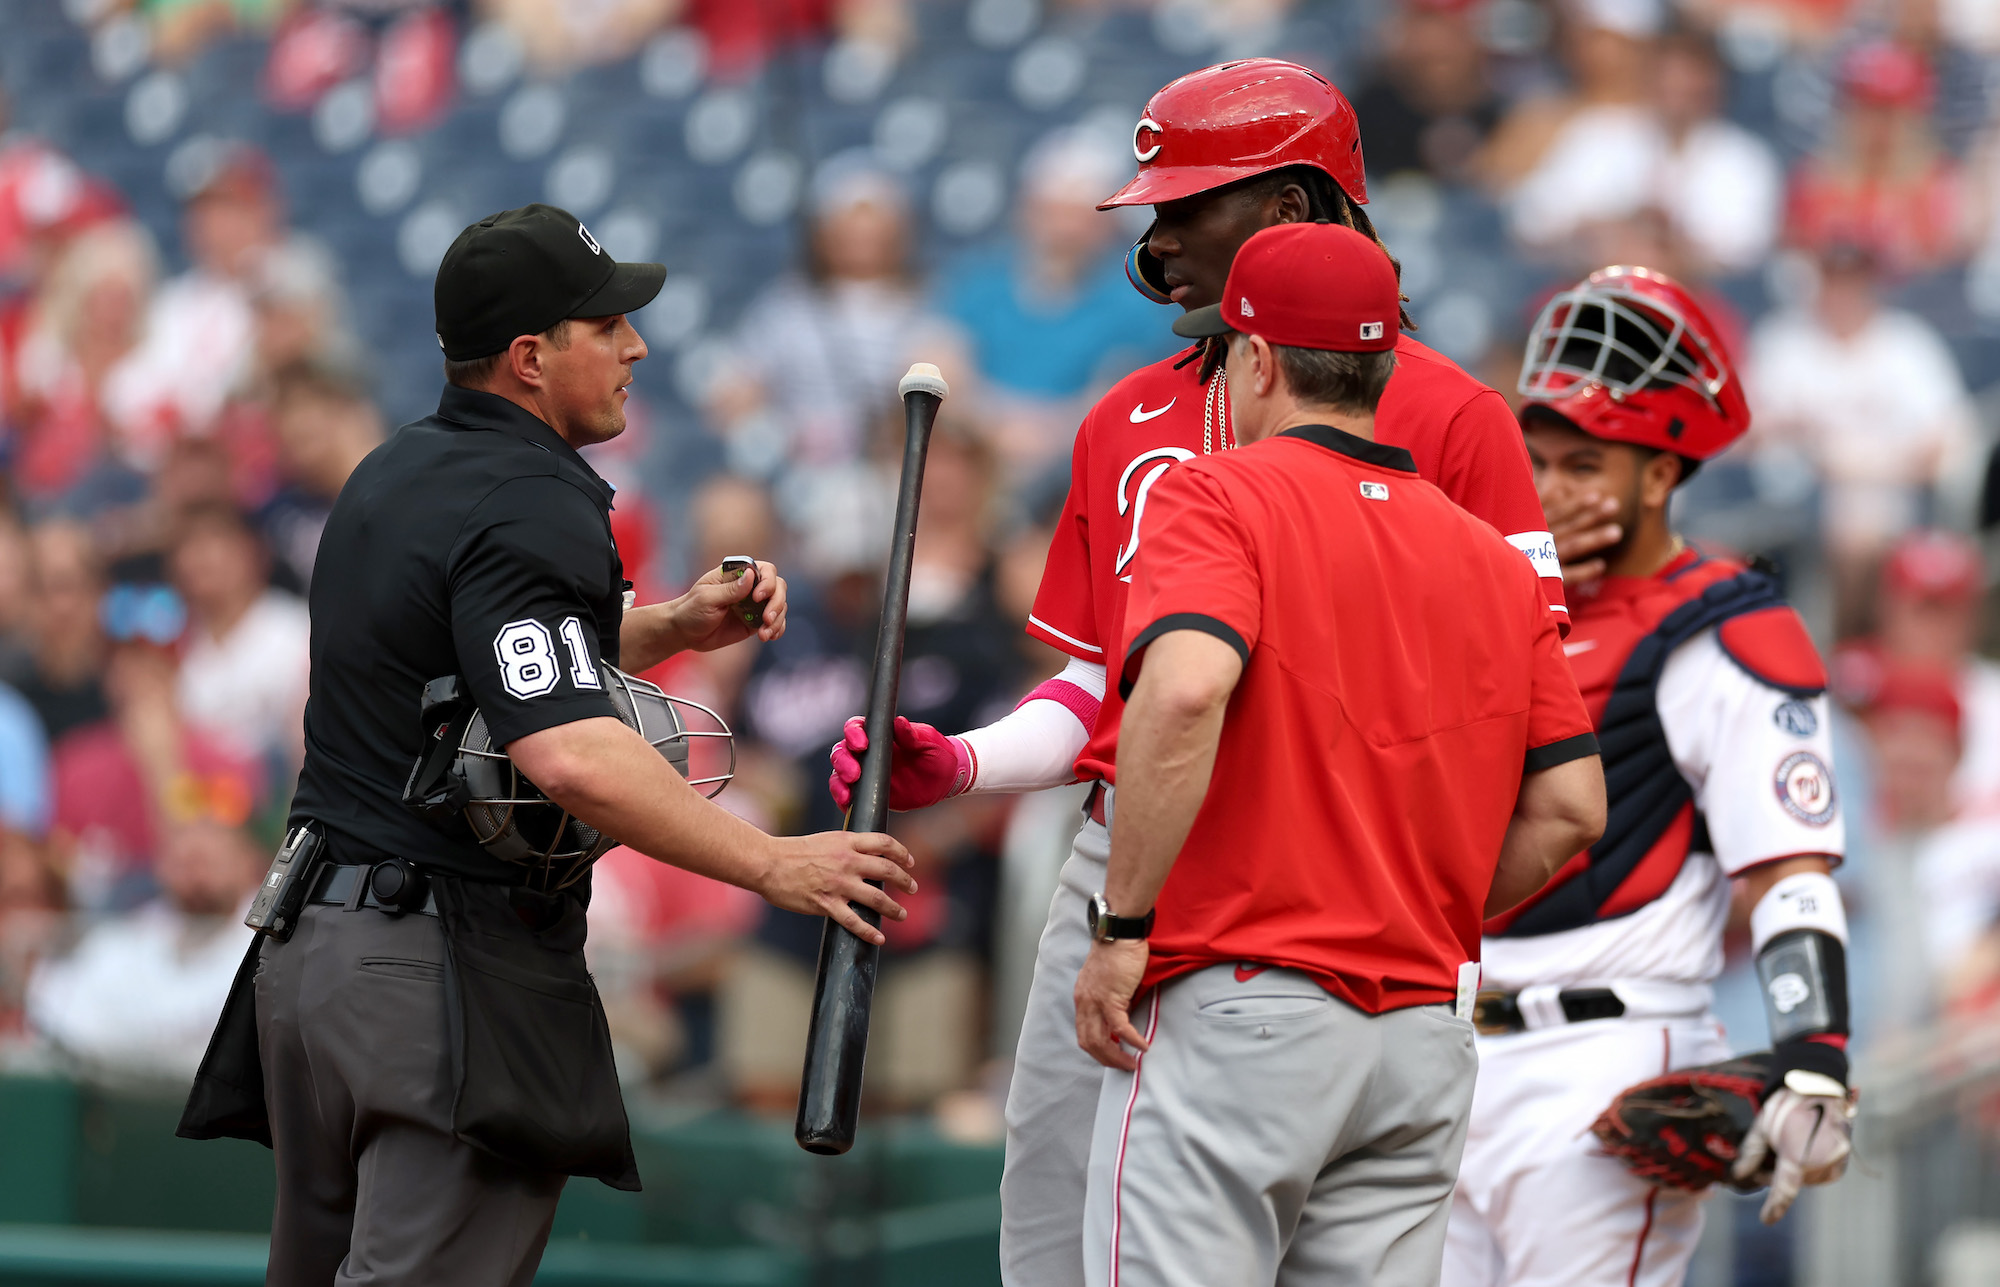 WASHINGTON, DC - JULY 05: Umpire Quinn Wolcott #81 hands the bat of Elly De La Cruz #44 of the Cincinnati Reds back to him as manager David Bell #25 looks on in the second inning against the Washington Nationals at Nationals Park on July 05, 2023 in Washington, DC. (Photo by Rob Carr/Getty Images)